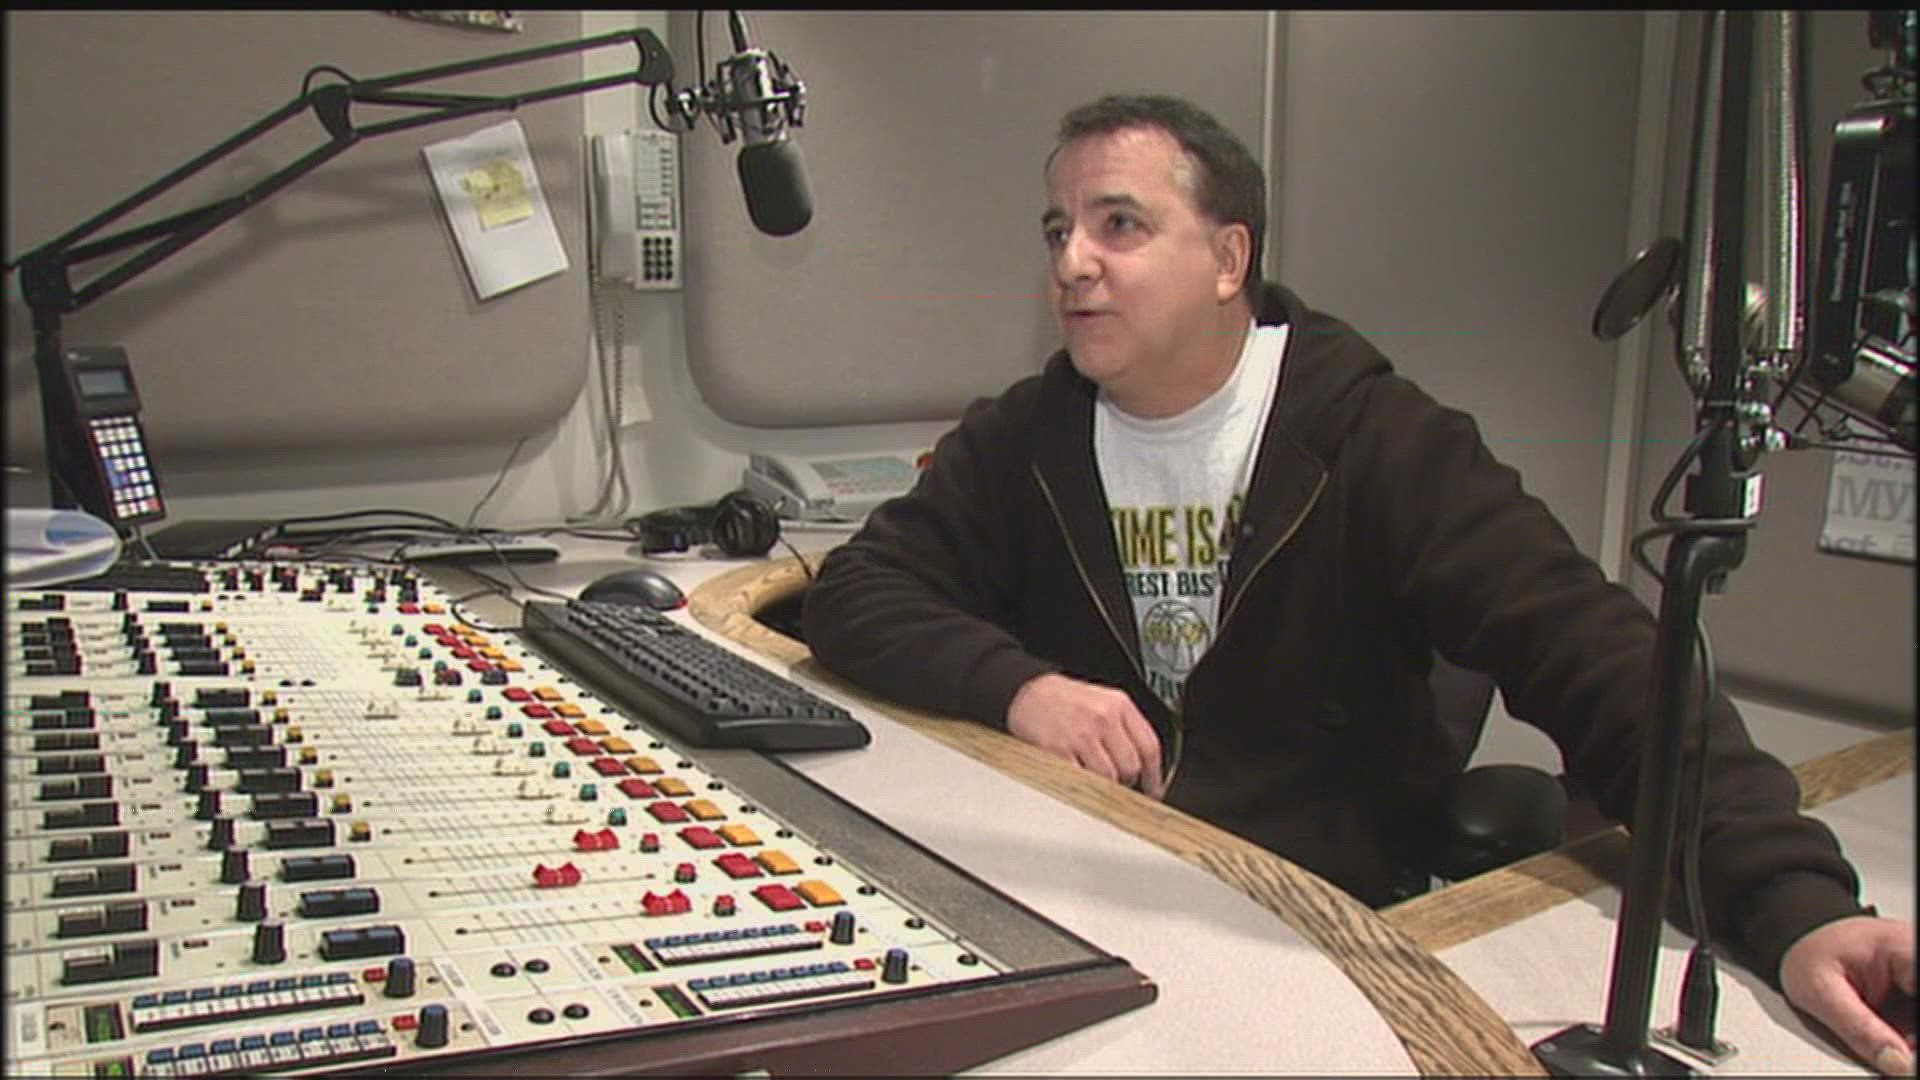 KIRO radio host Monson died at a Seattle hospital on Saturday.  He was 61 years old.